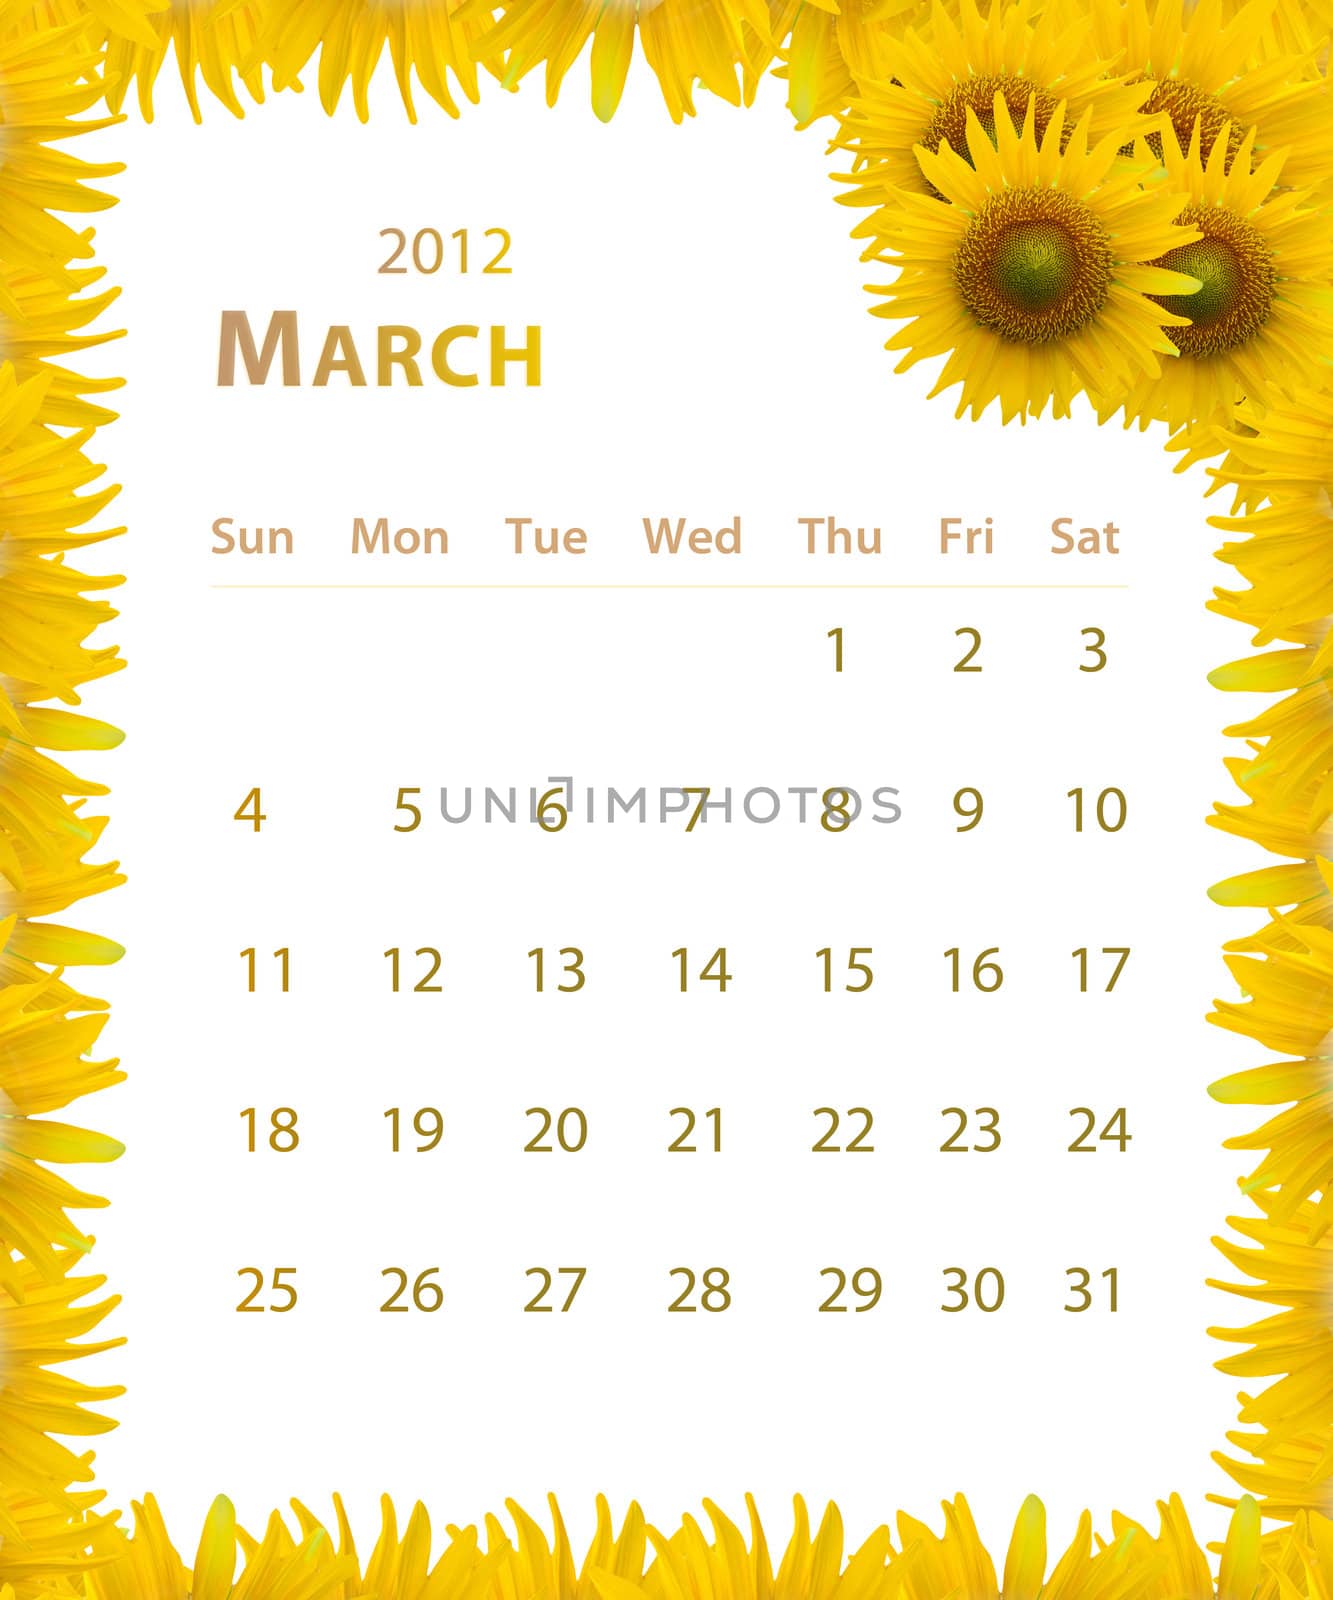 2012 year calendar ,March with Sunflower frame design by jakgree